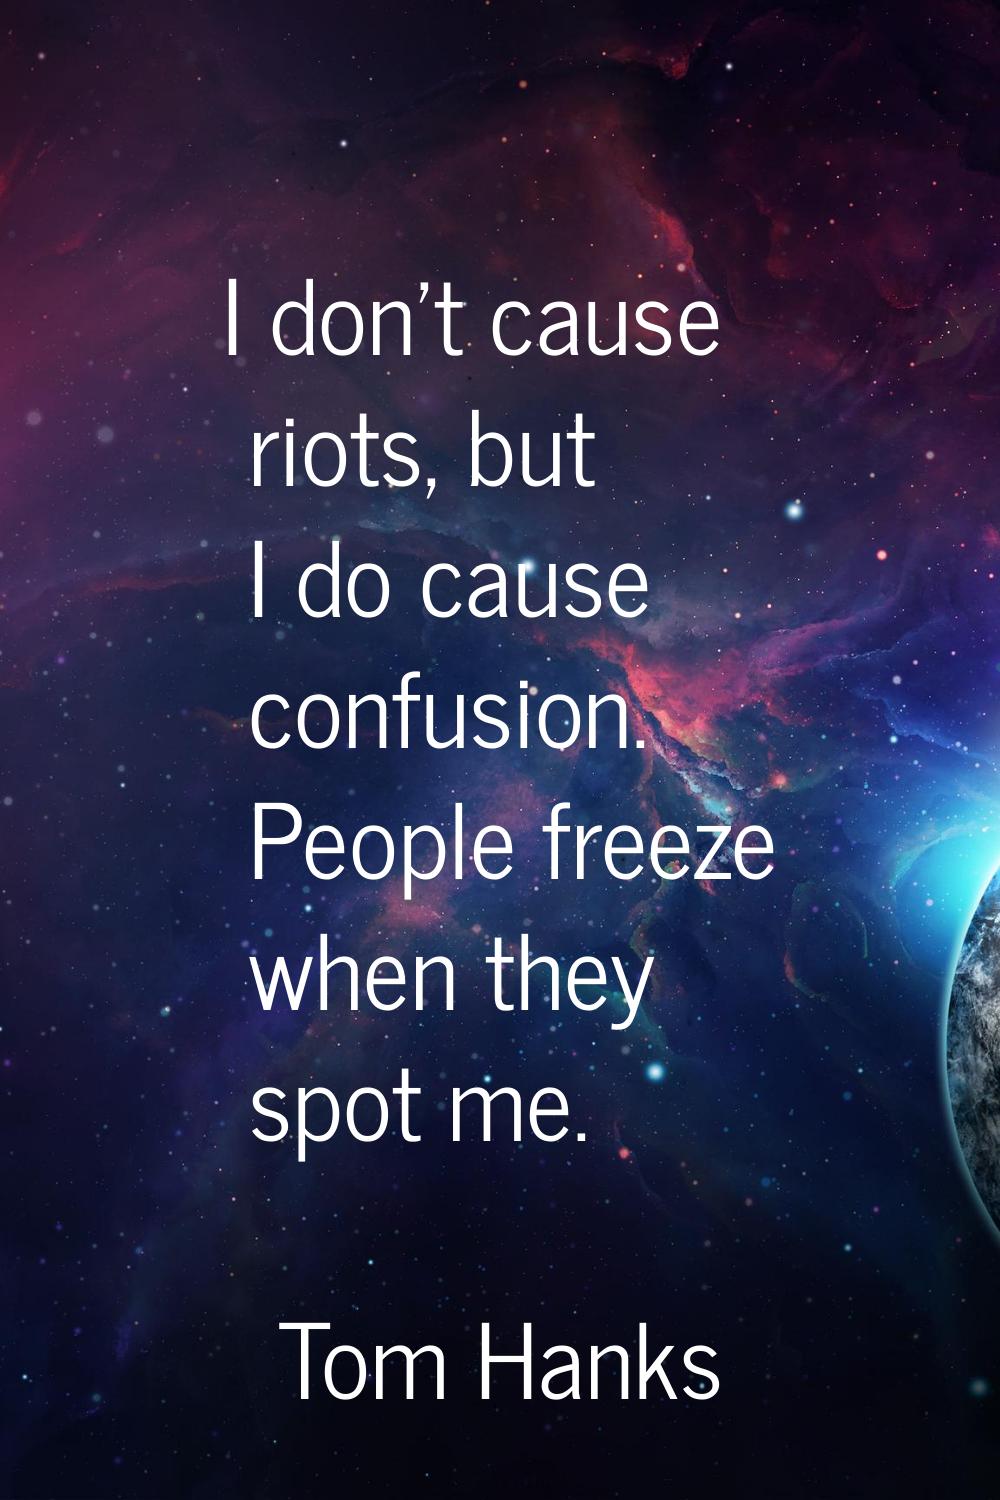 I don't cause riots, but I do cause confusion. People freeze when they spot me.